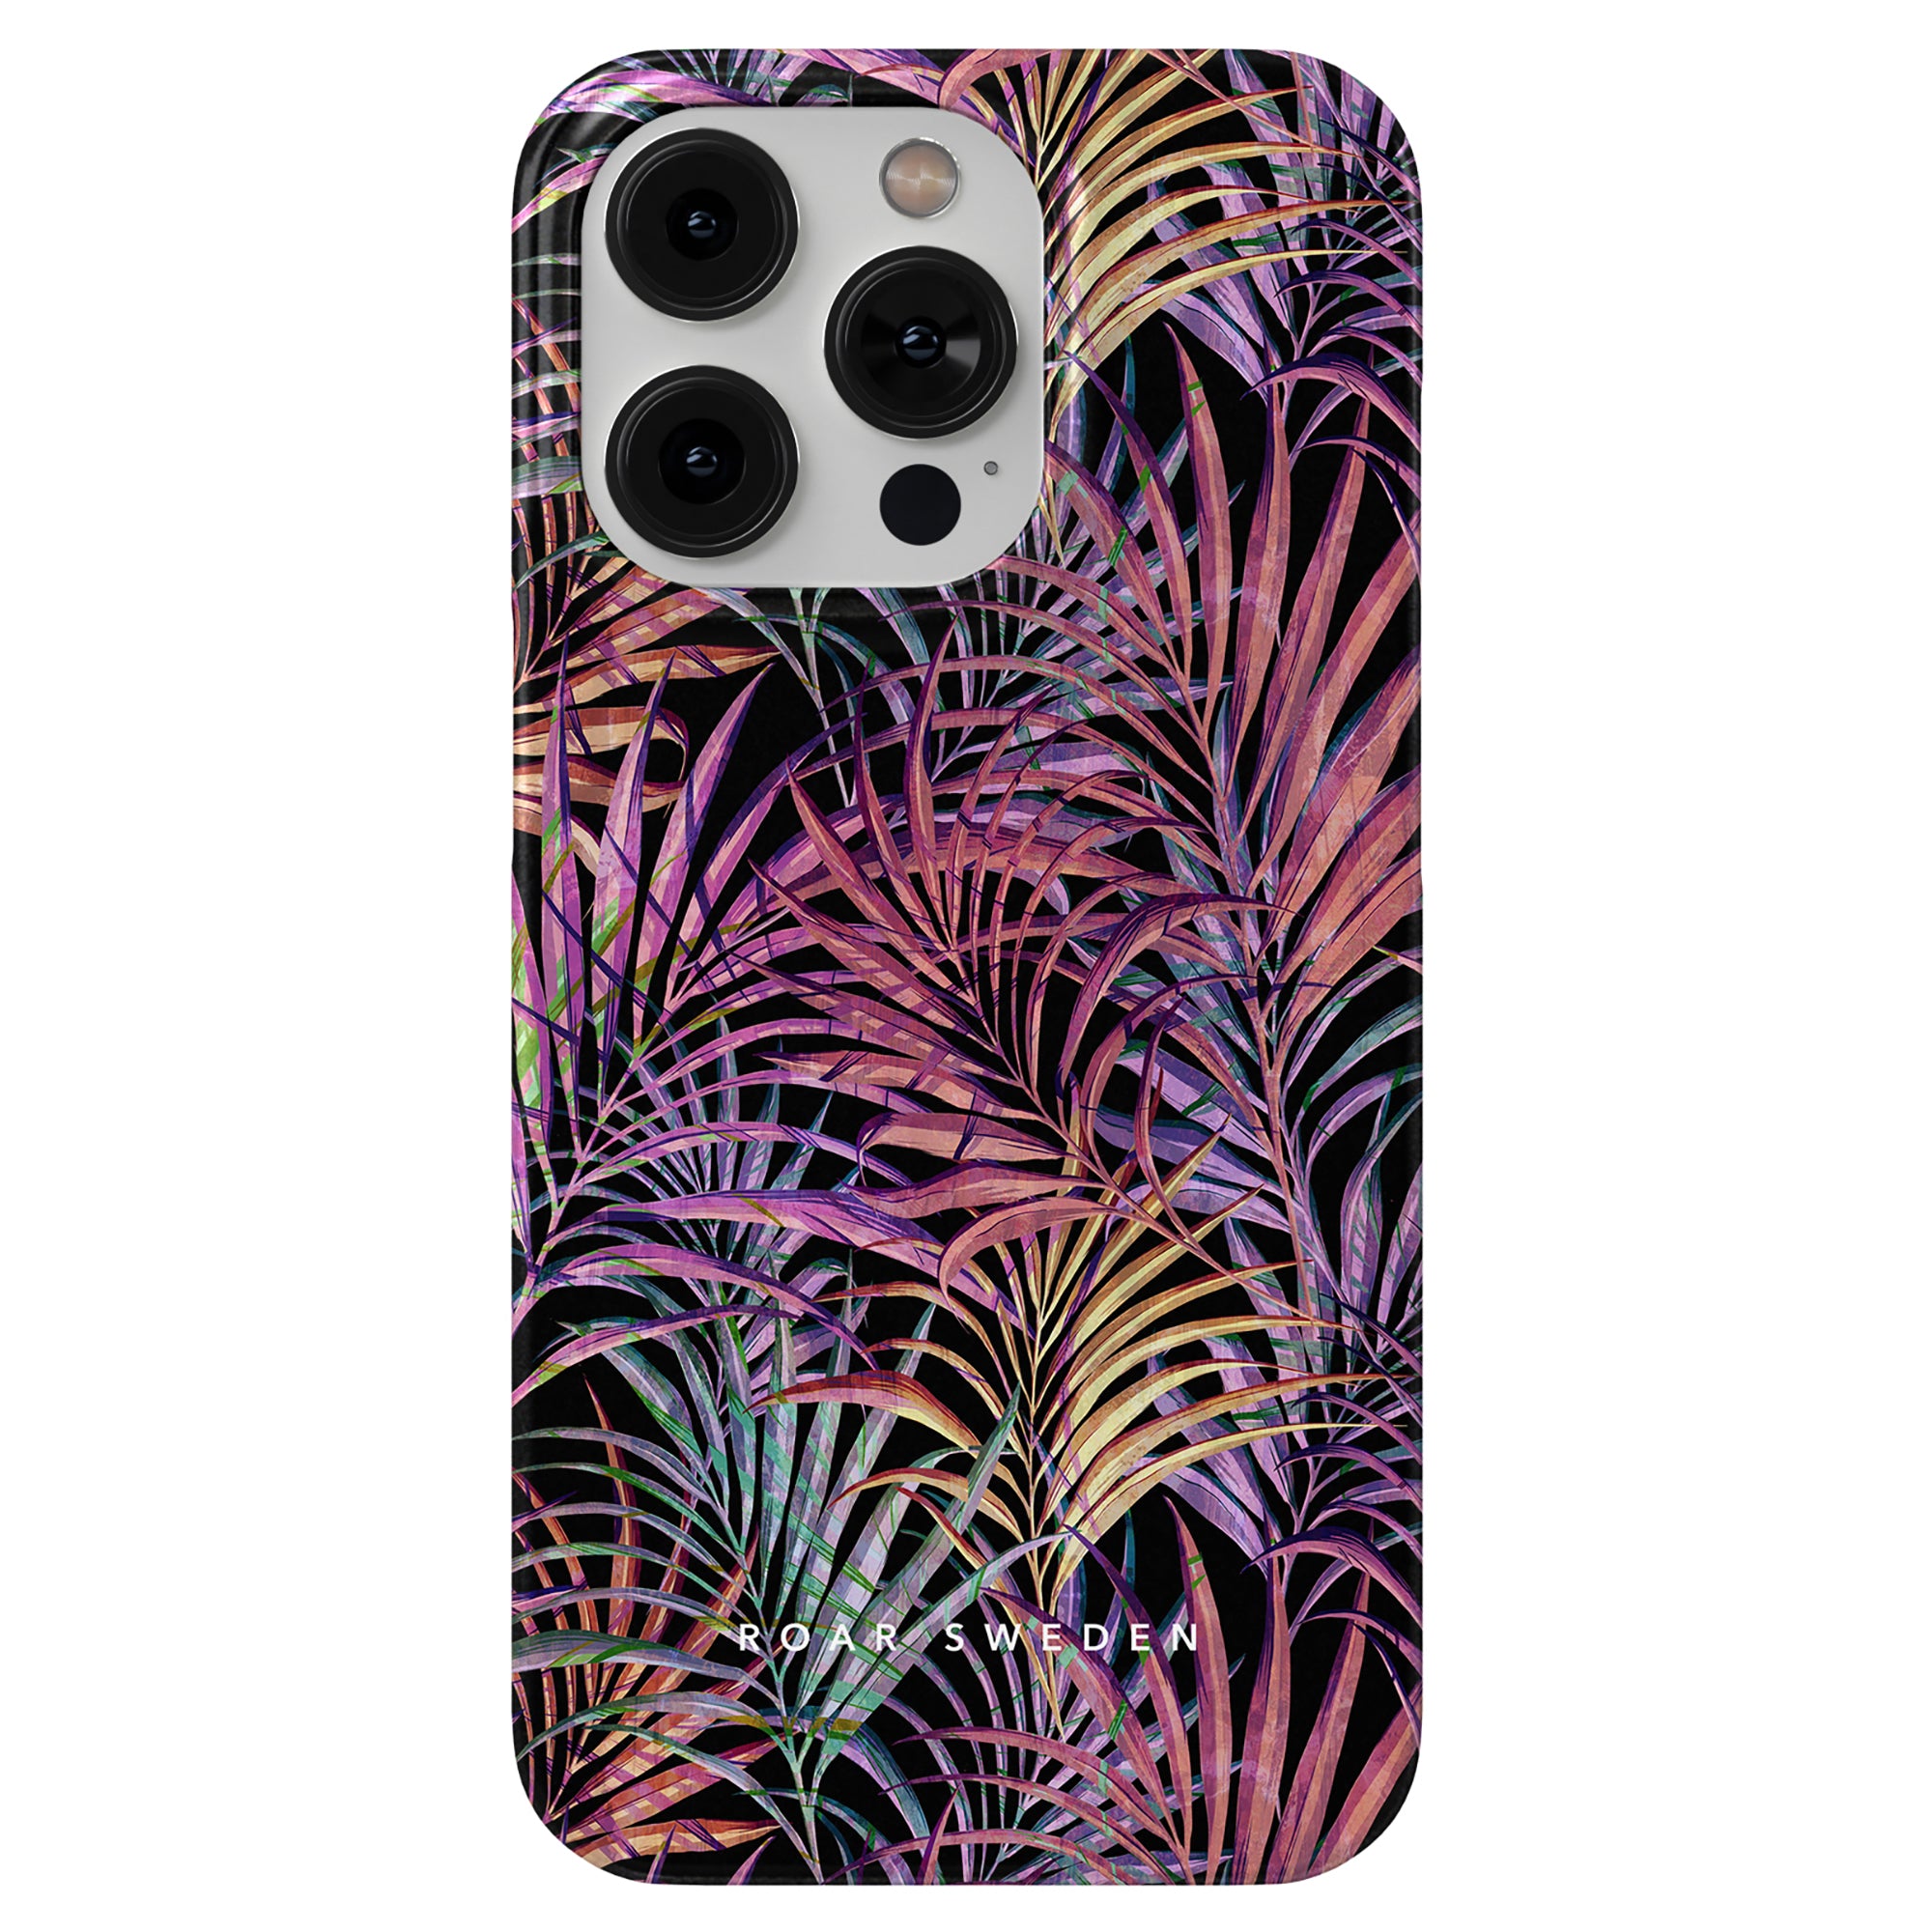 A smartphone case with a vibrant Summer Palms - Slim case design, featuring organic "ideal of sweden" text at the bottom.